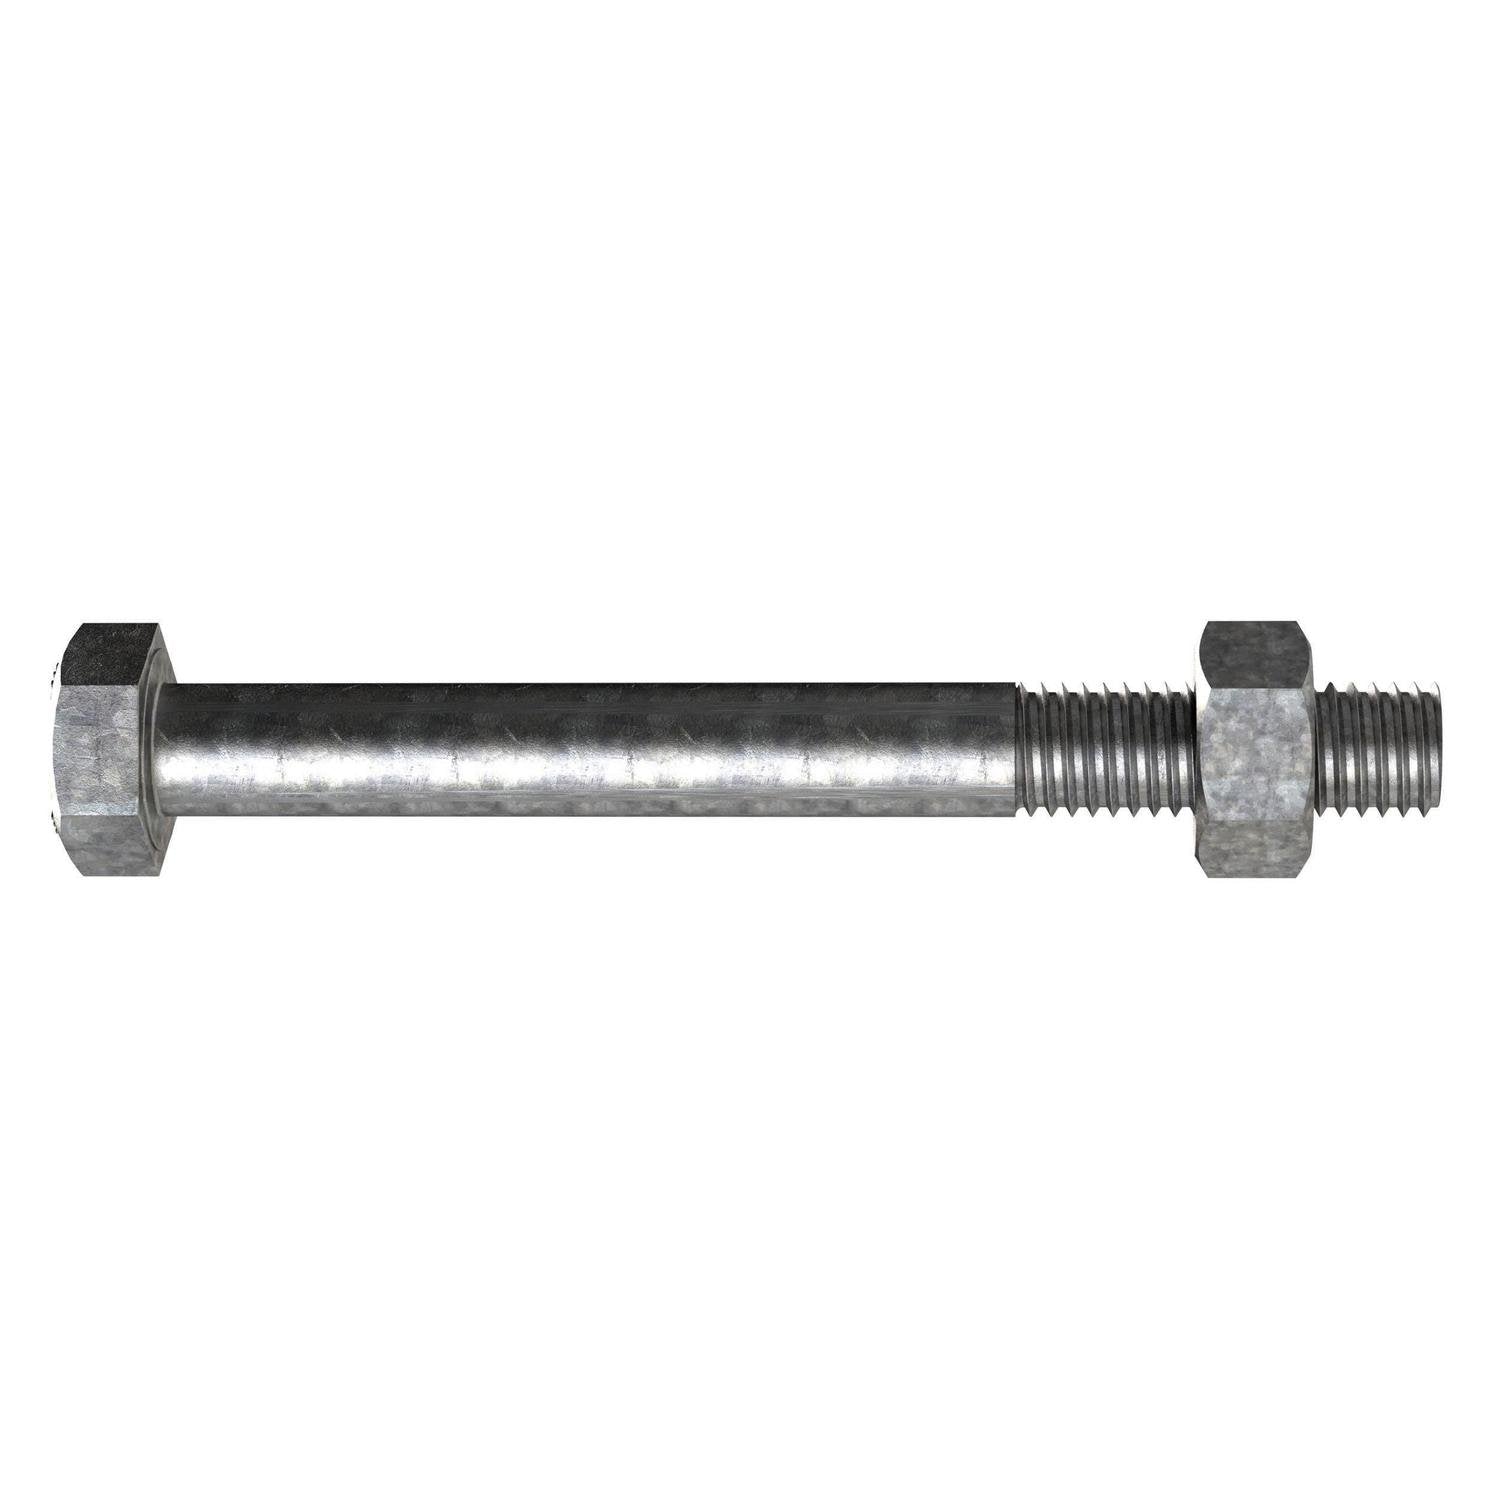 Bremick Engineer Bolts M12 X 300Mm Galvanised